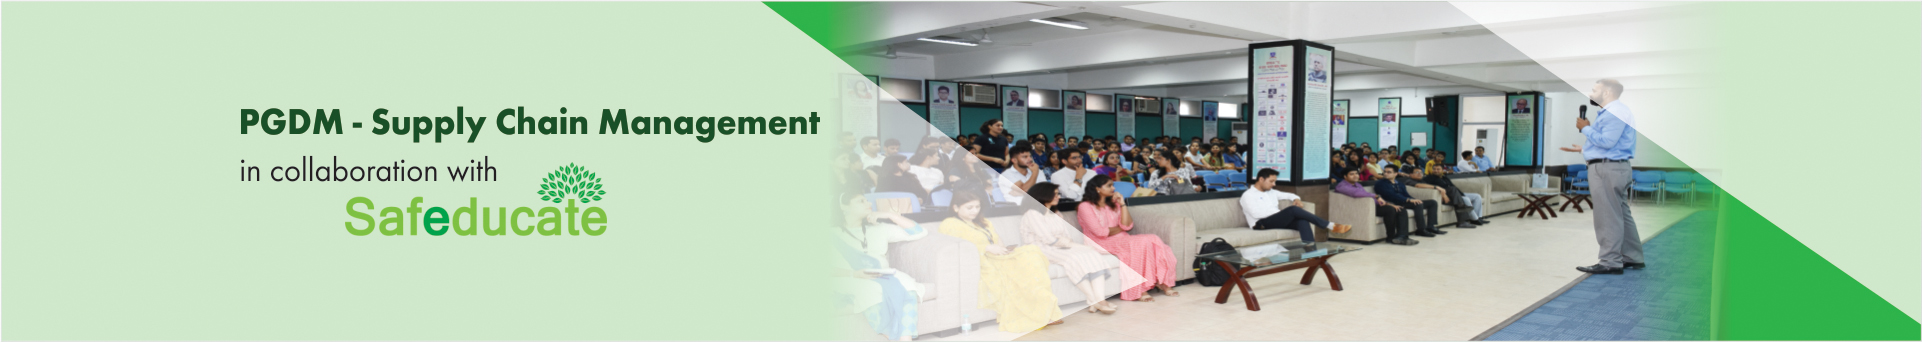 PGDM - SCM programme in collaboration with industry partner safeducate